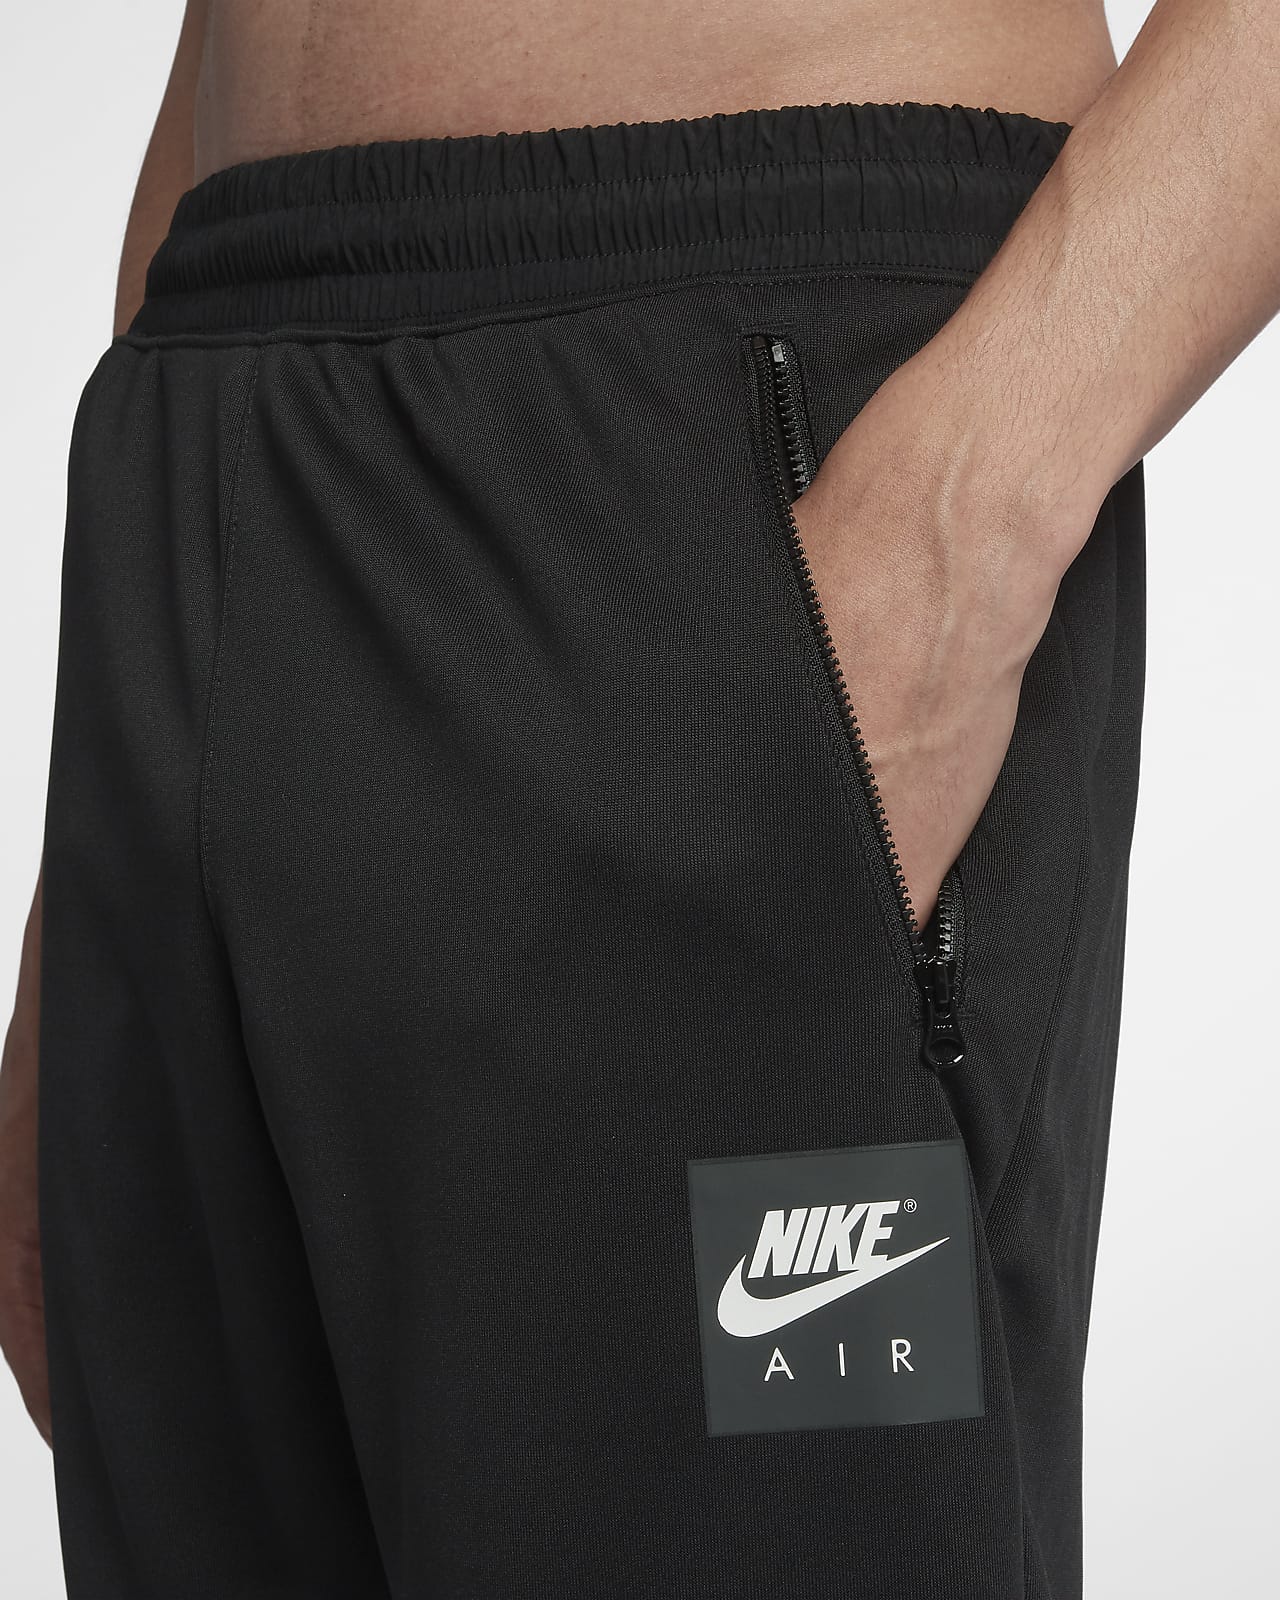 Nike/Nike official authentic 2021 summer new men's casual sports trousers  DH4225-010